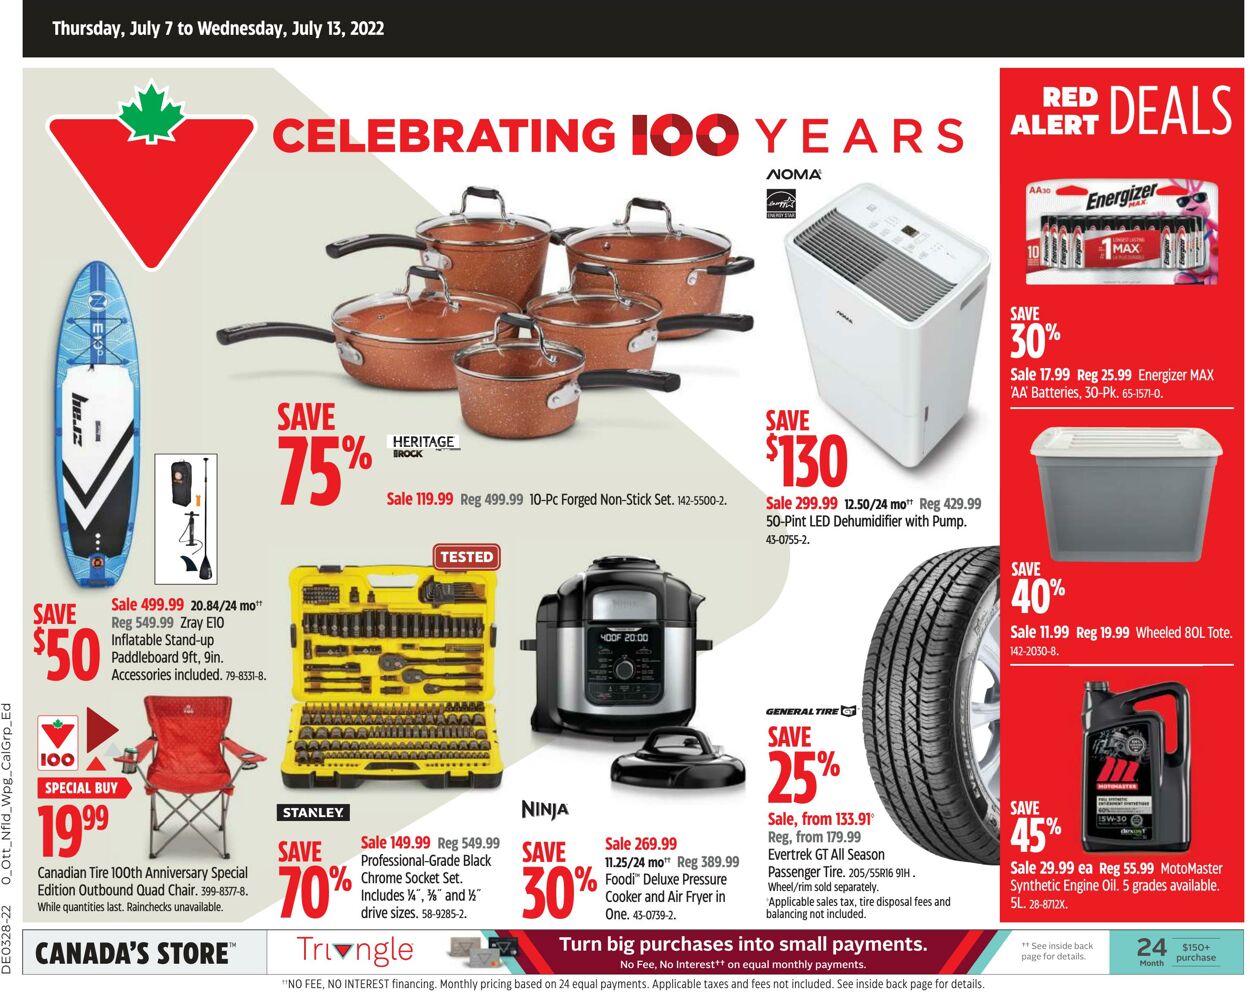 Canadian Tire Promotional flyers